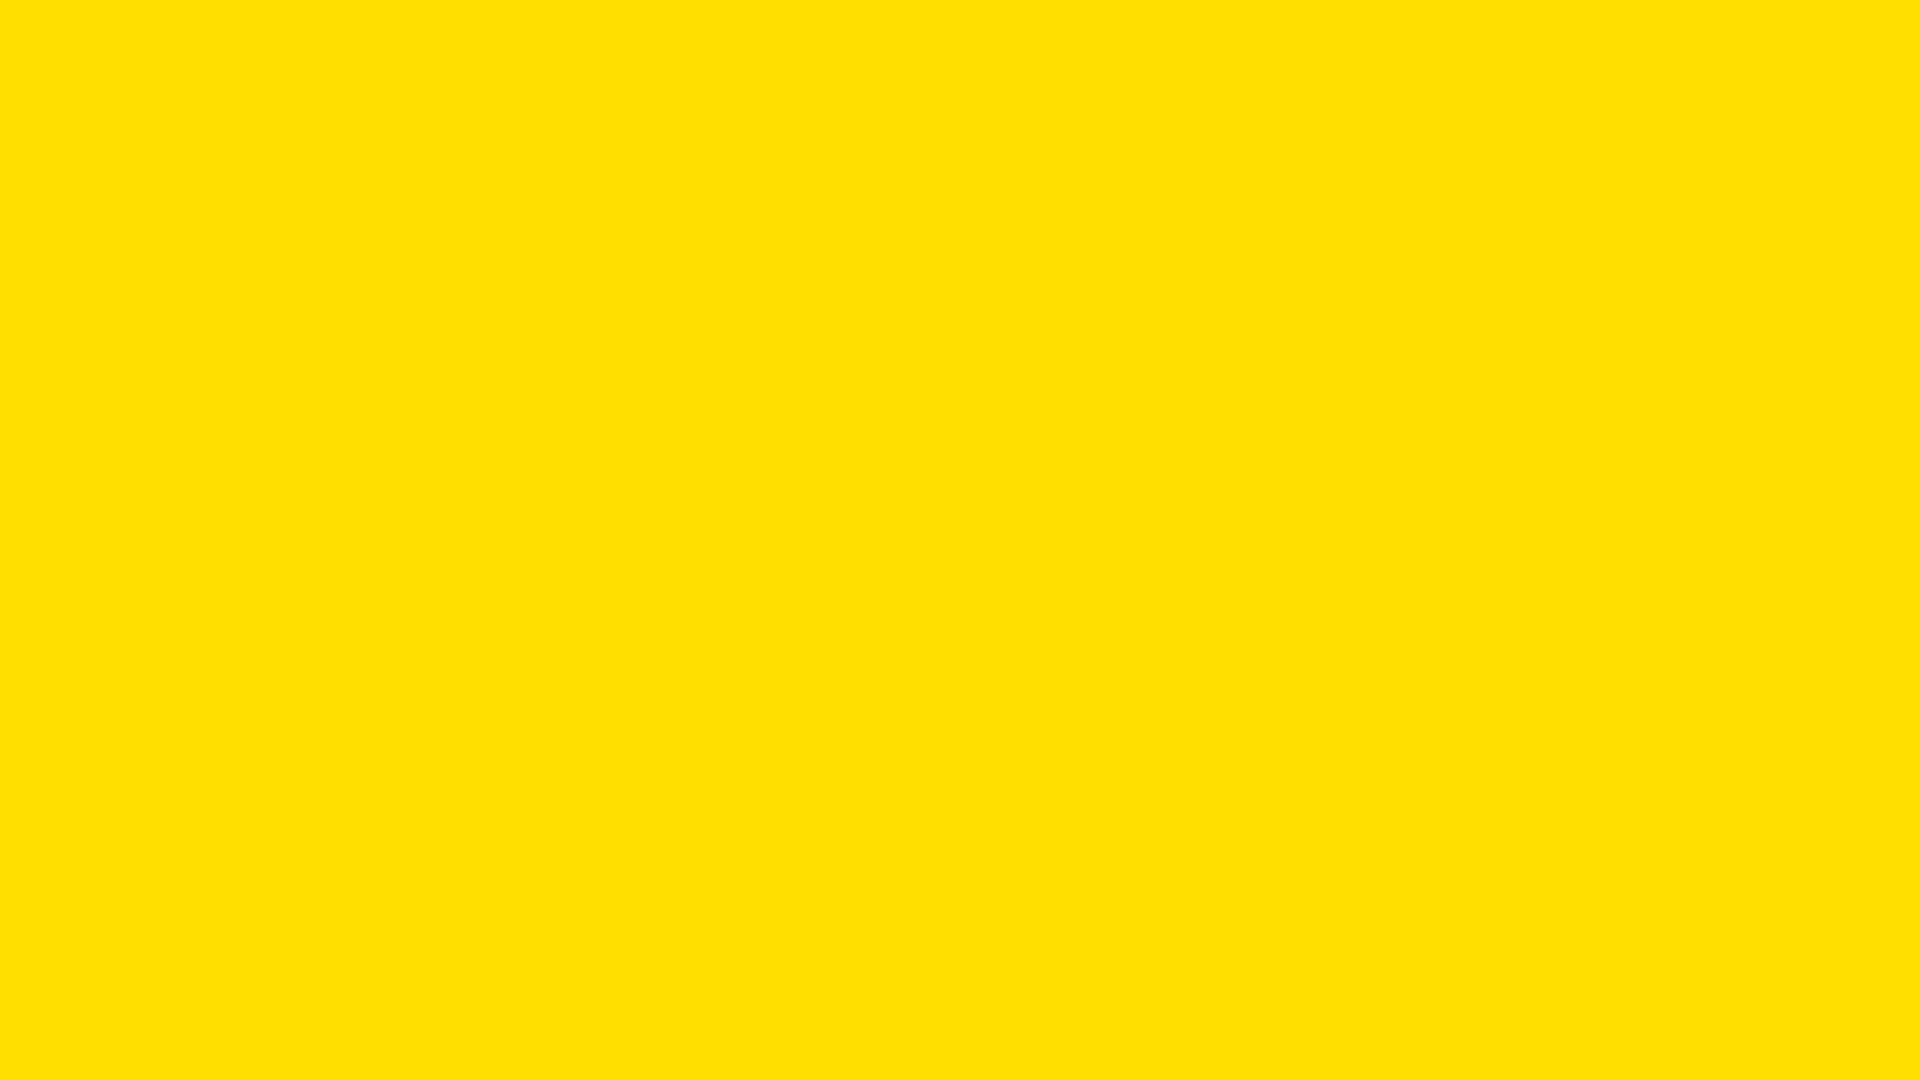 1920x1080 Golden Yellow Solid Color Background